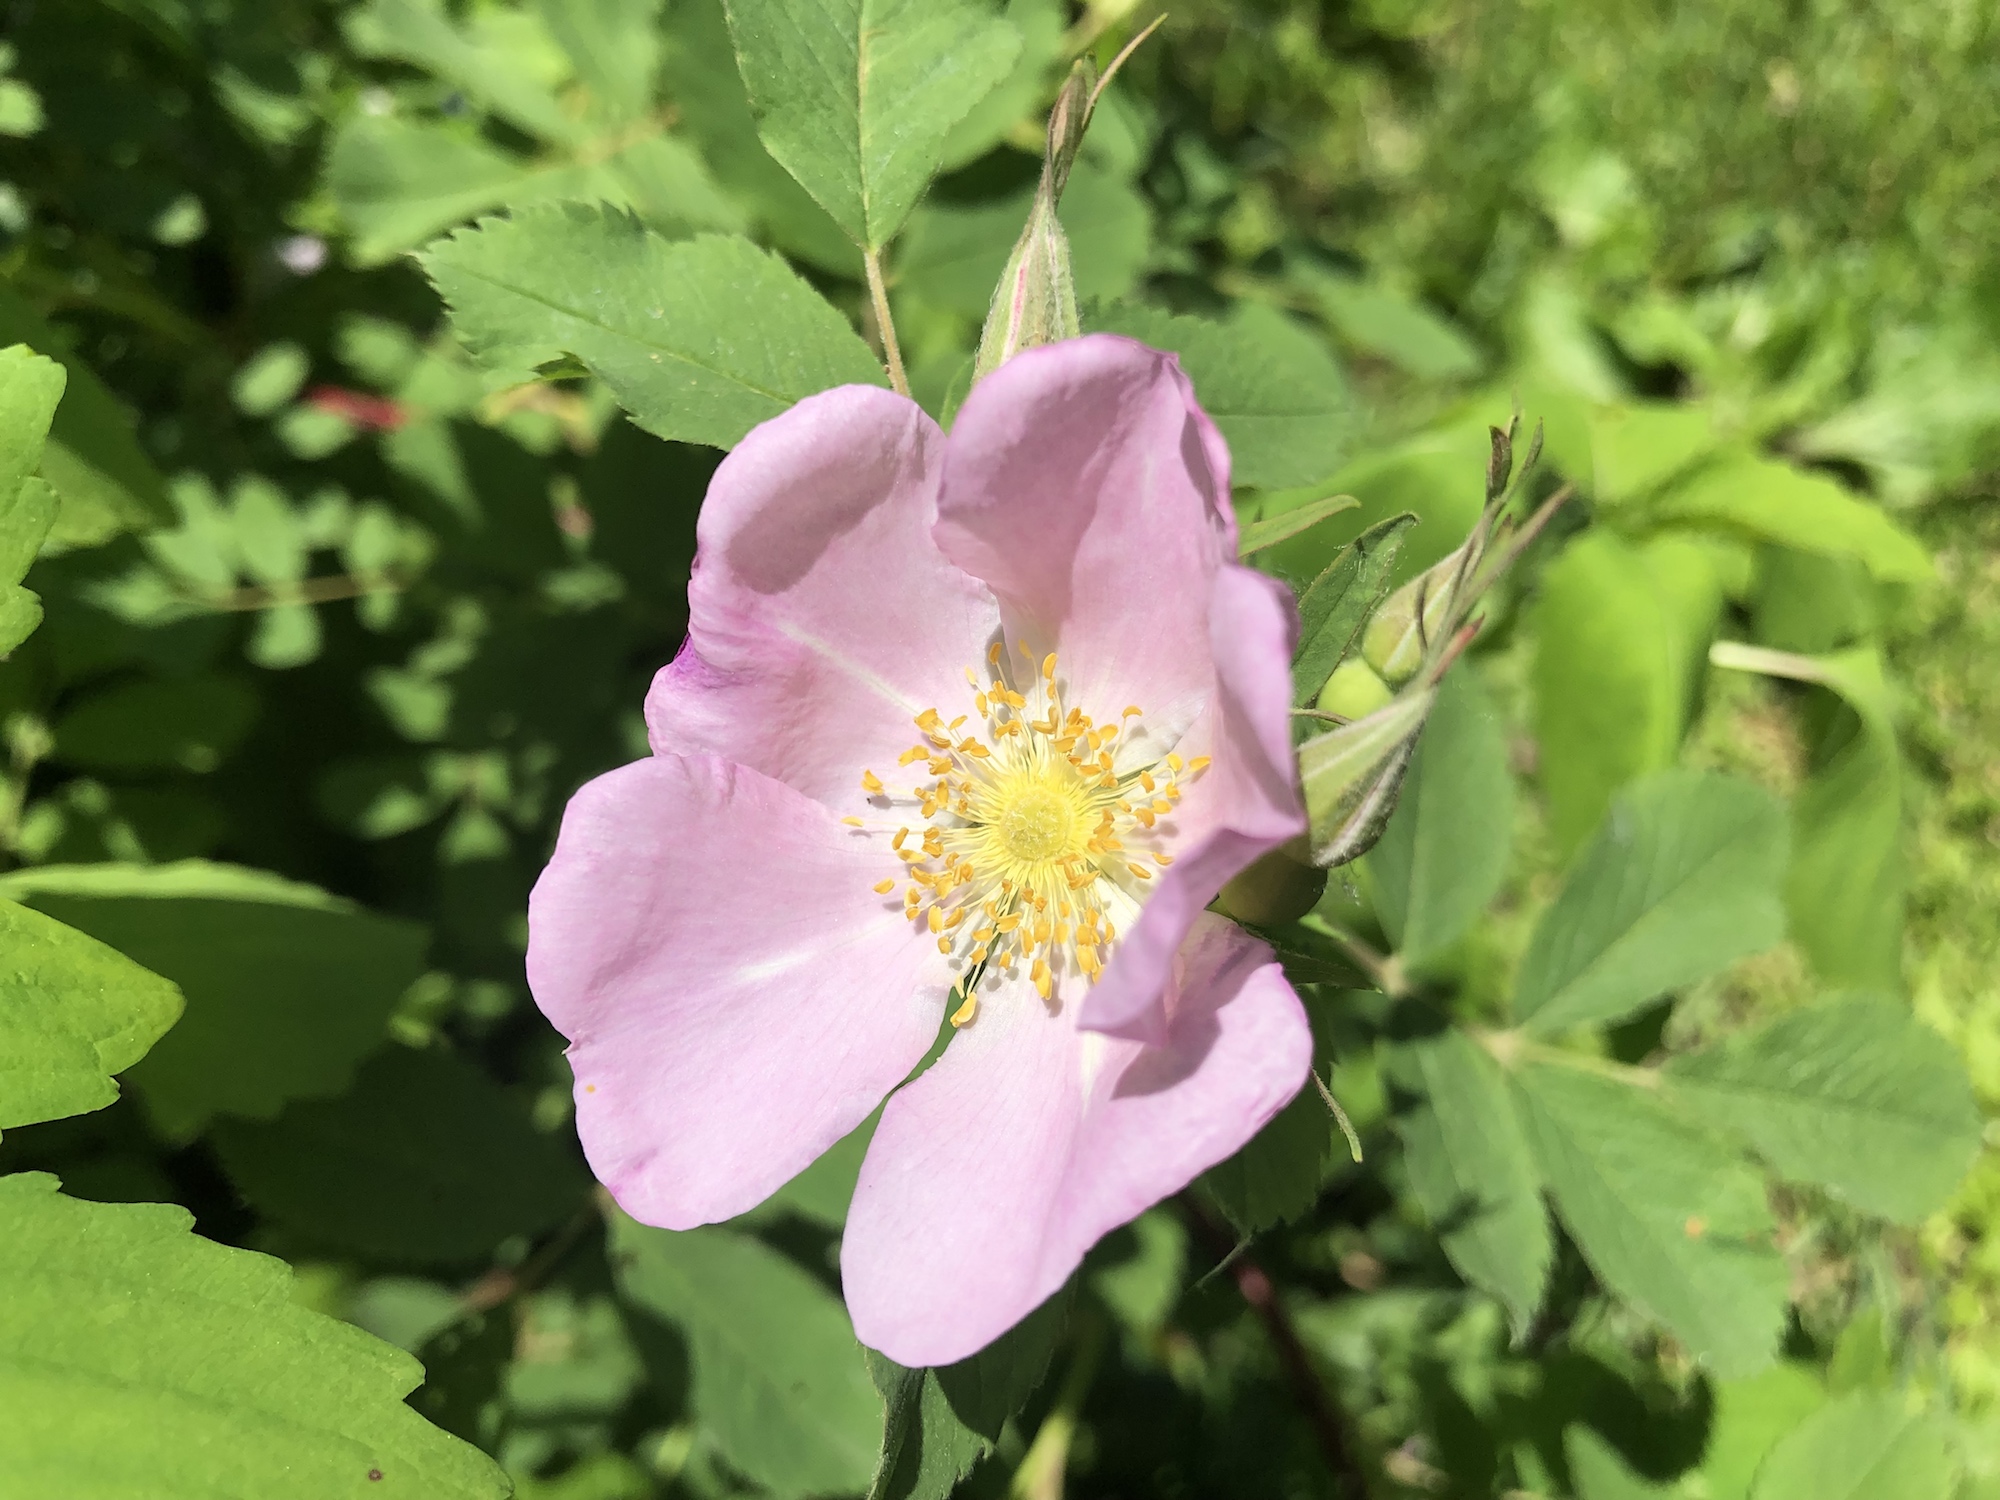 Prairie Rose near Council Ring in the Oak Savanna in Madison, Wisconsin on June 5, 2019.